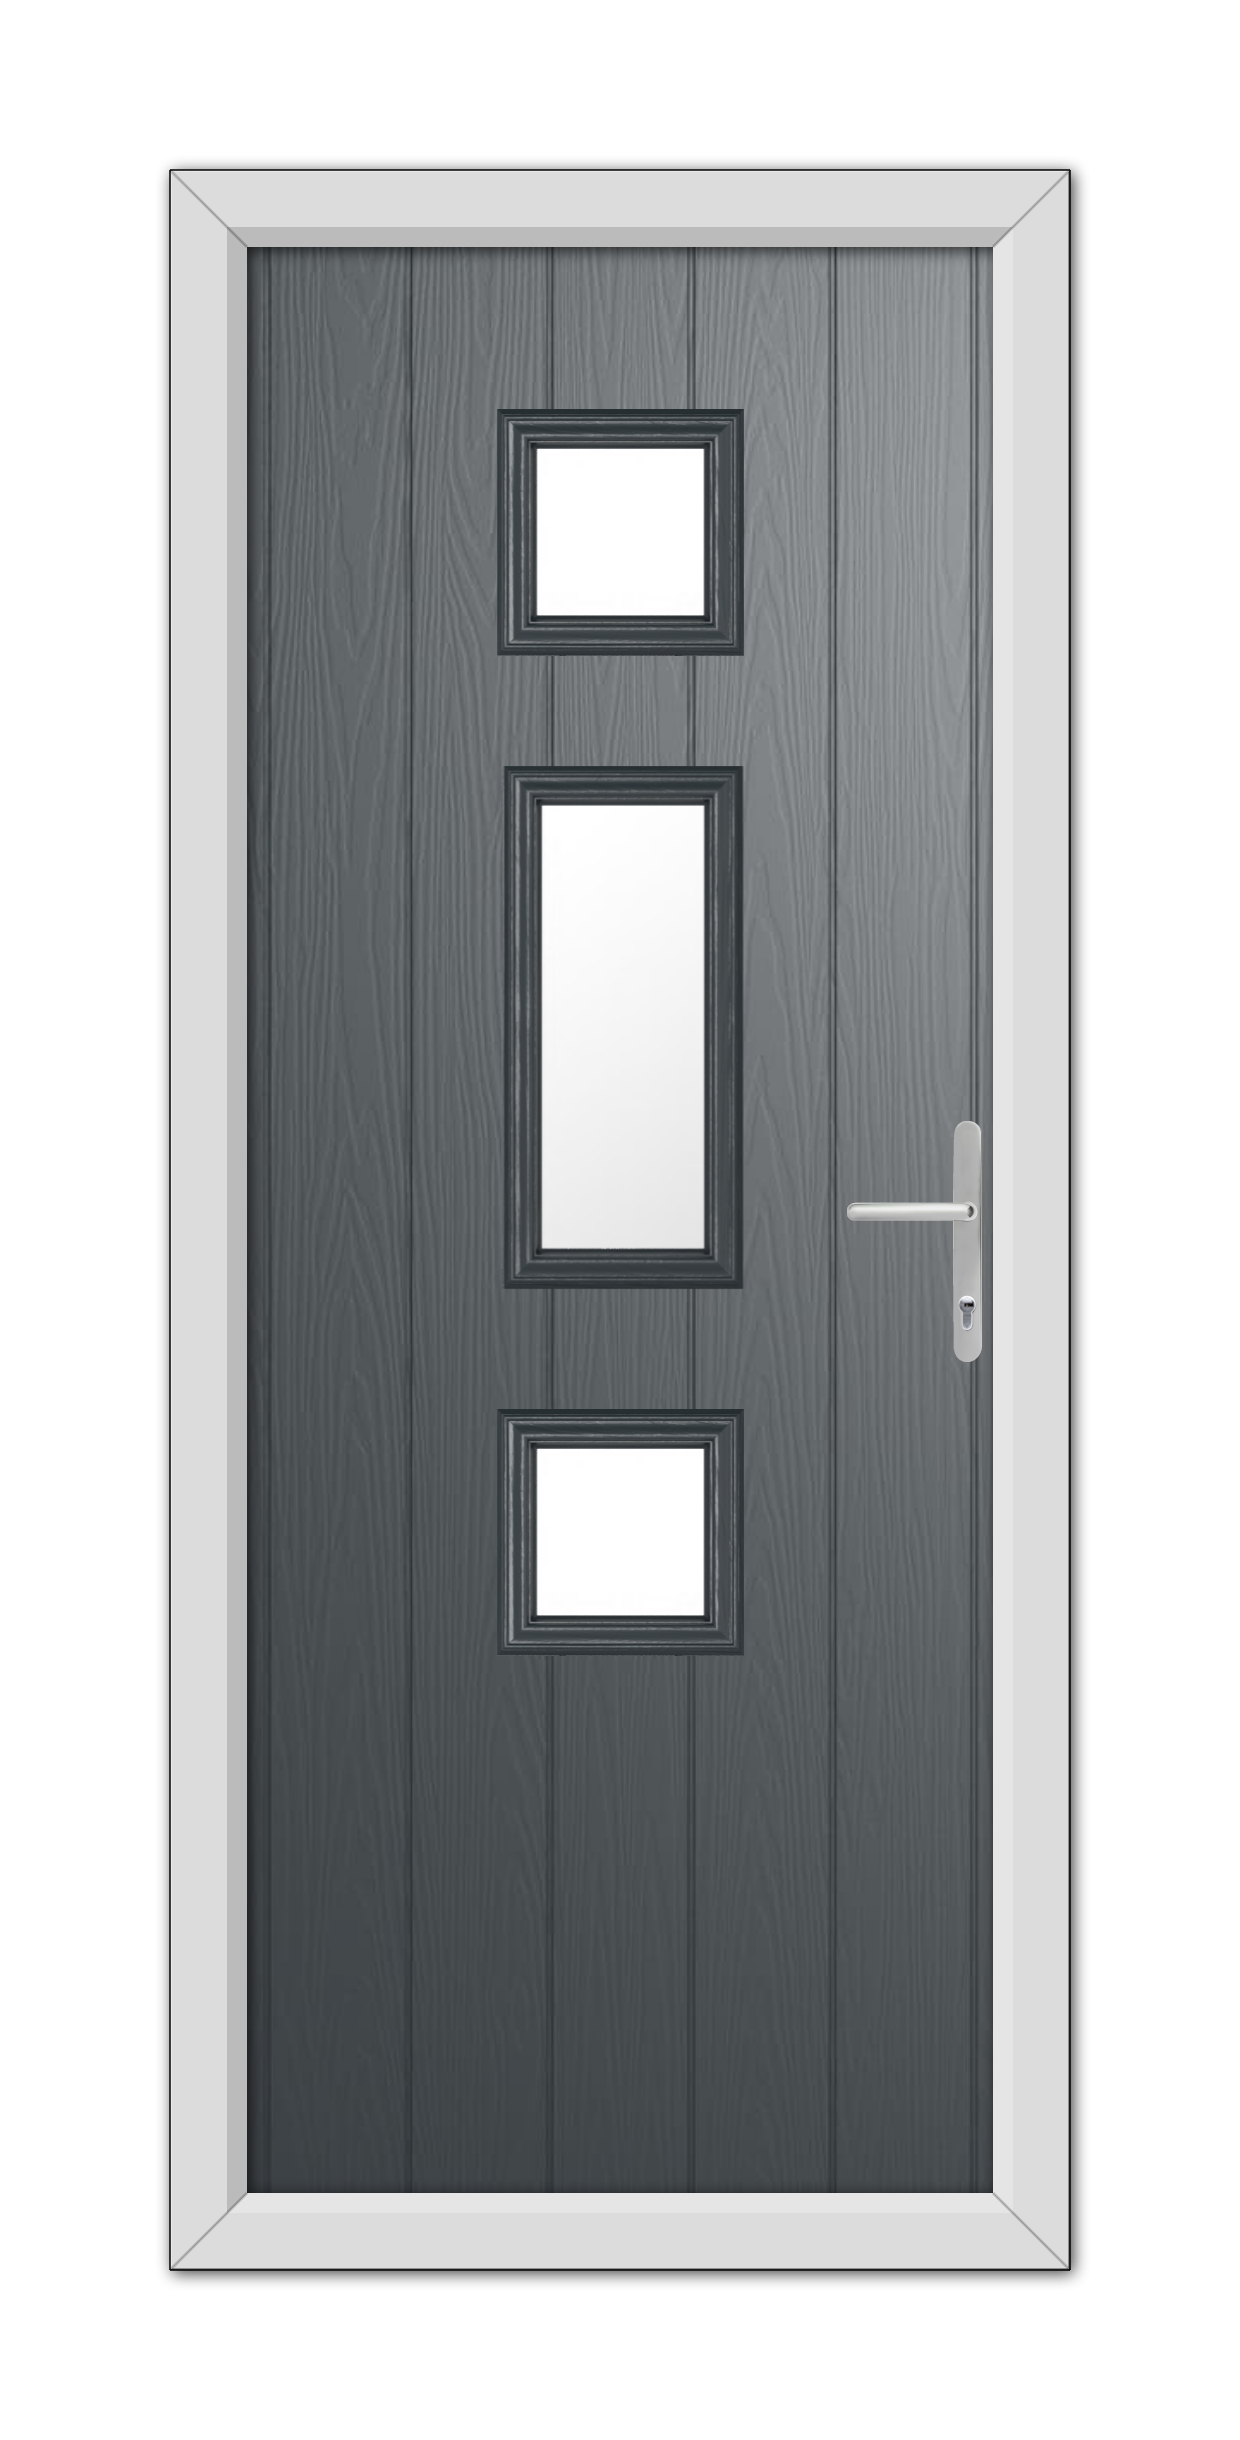 A modern Anthracite Grey York Composite Door 48mm Timber Core with a white frame, featuring three rectangular glass panels and a metallic handle.